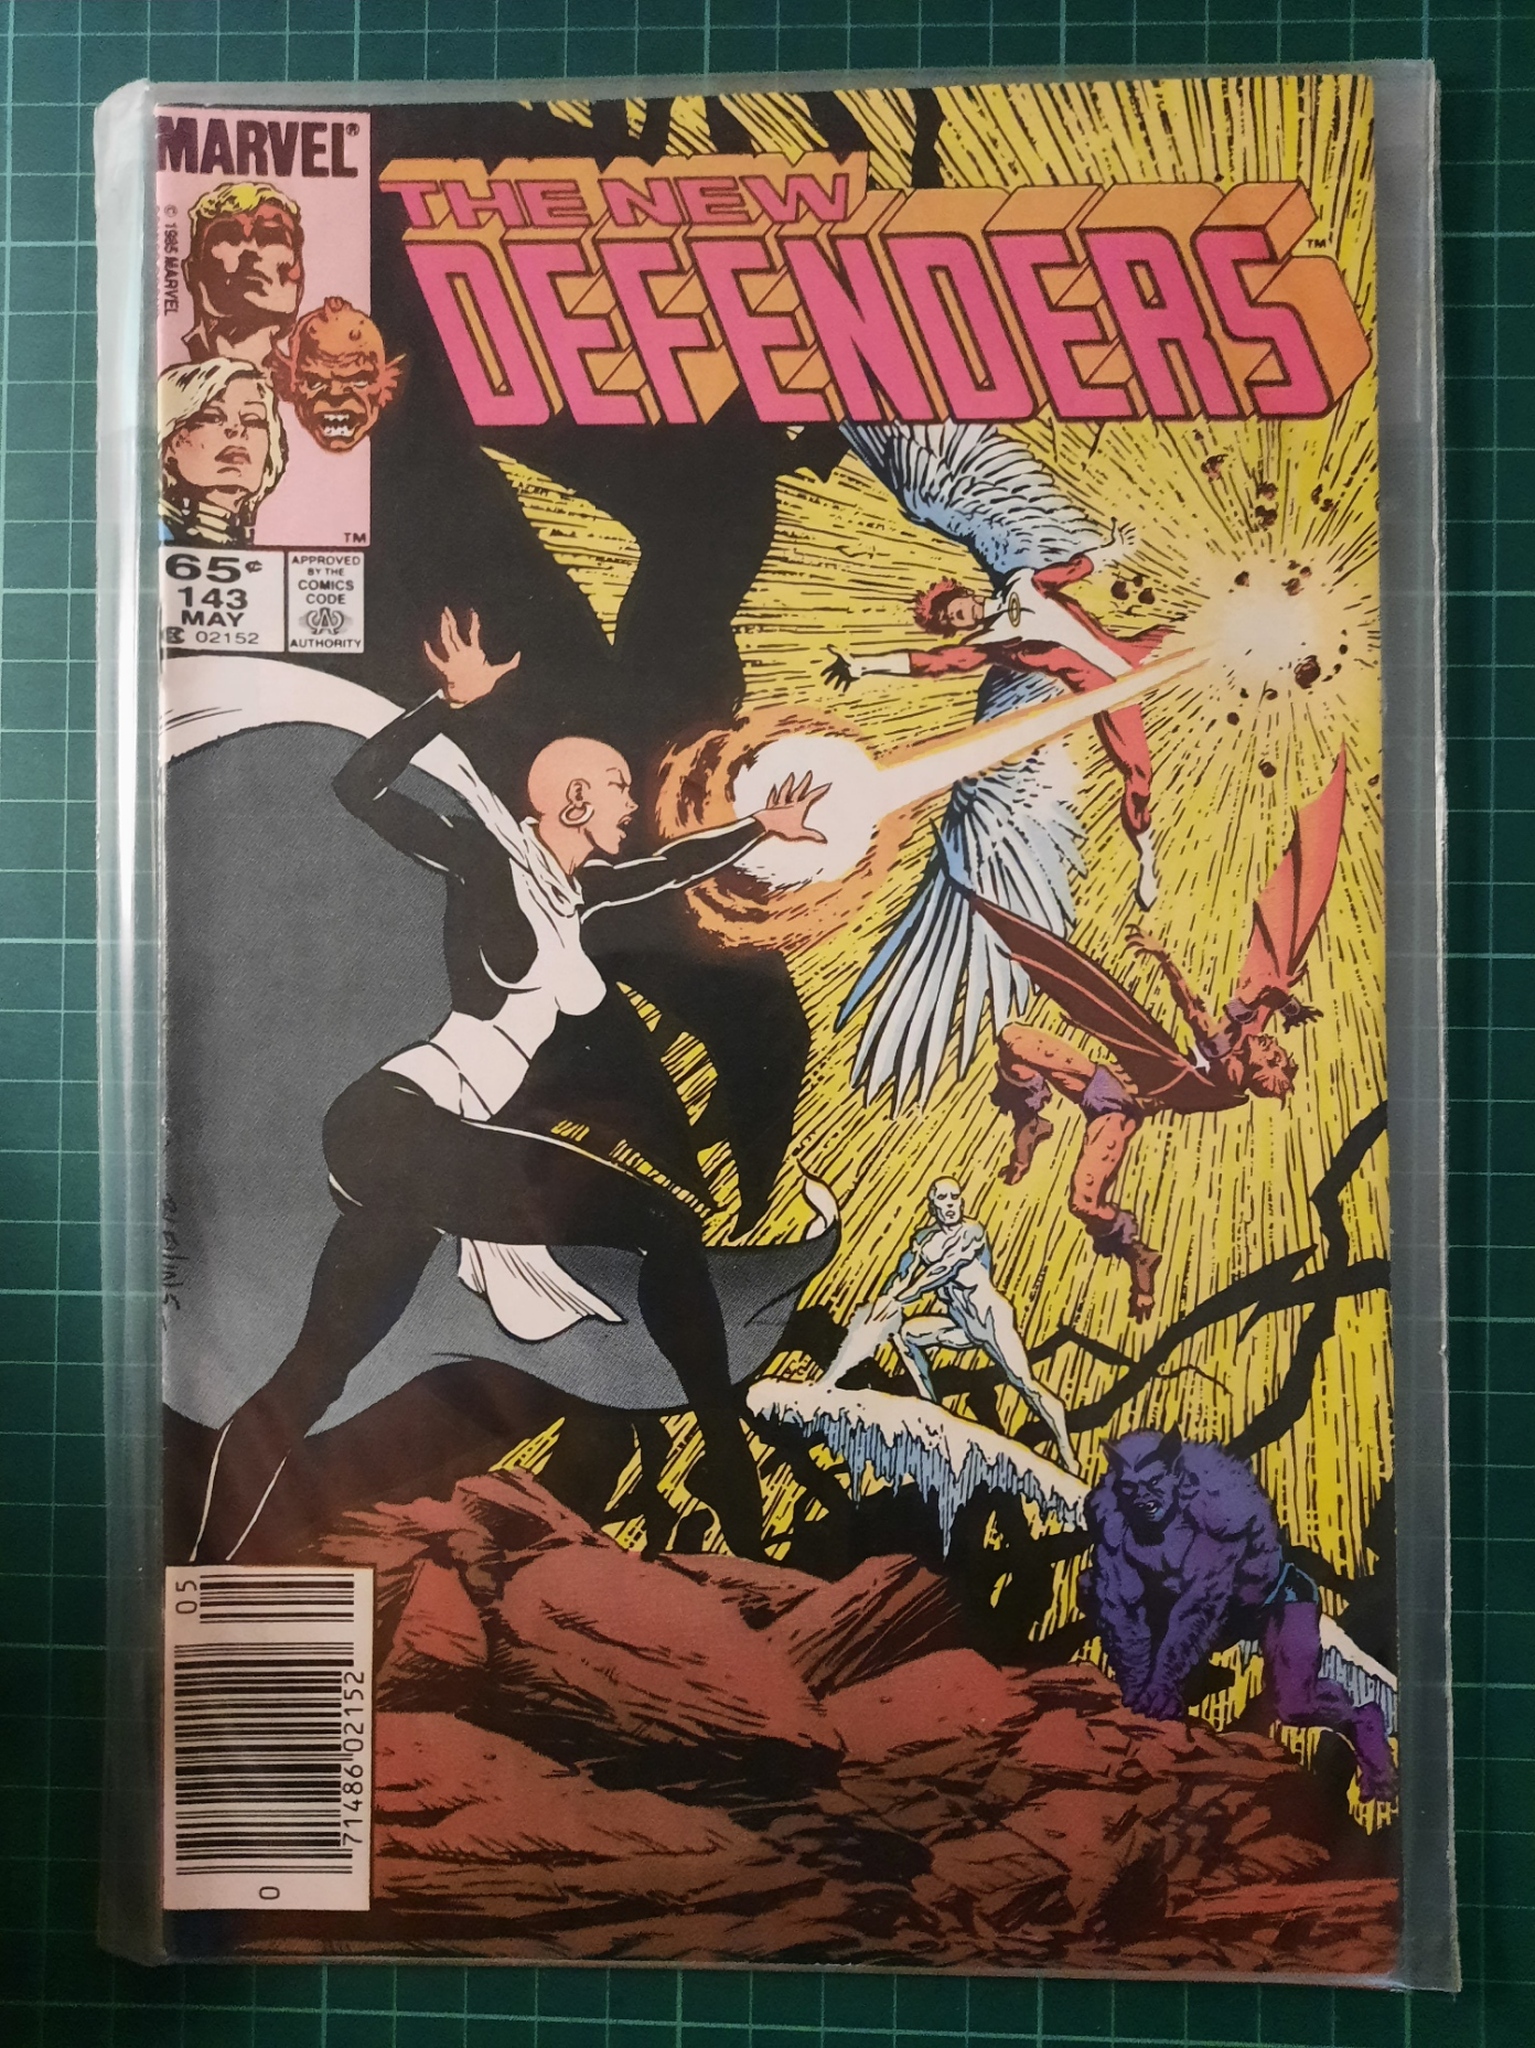 The new Defenders #125